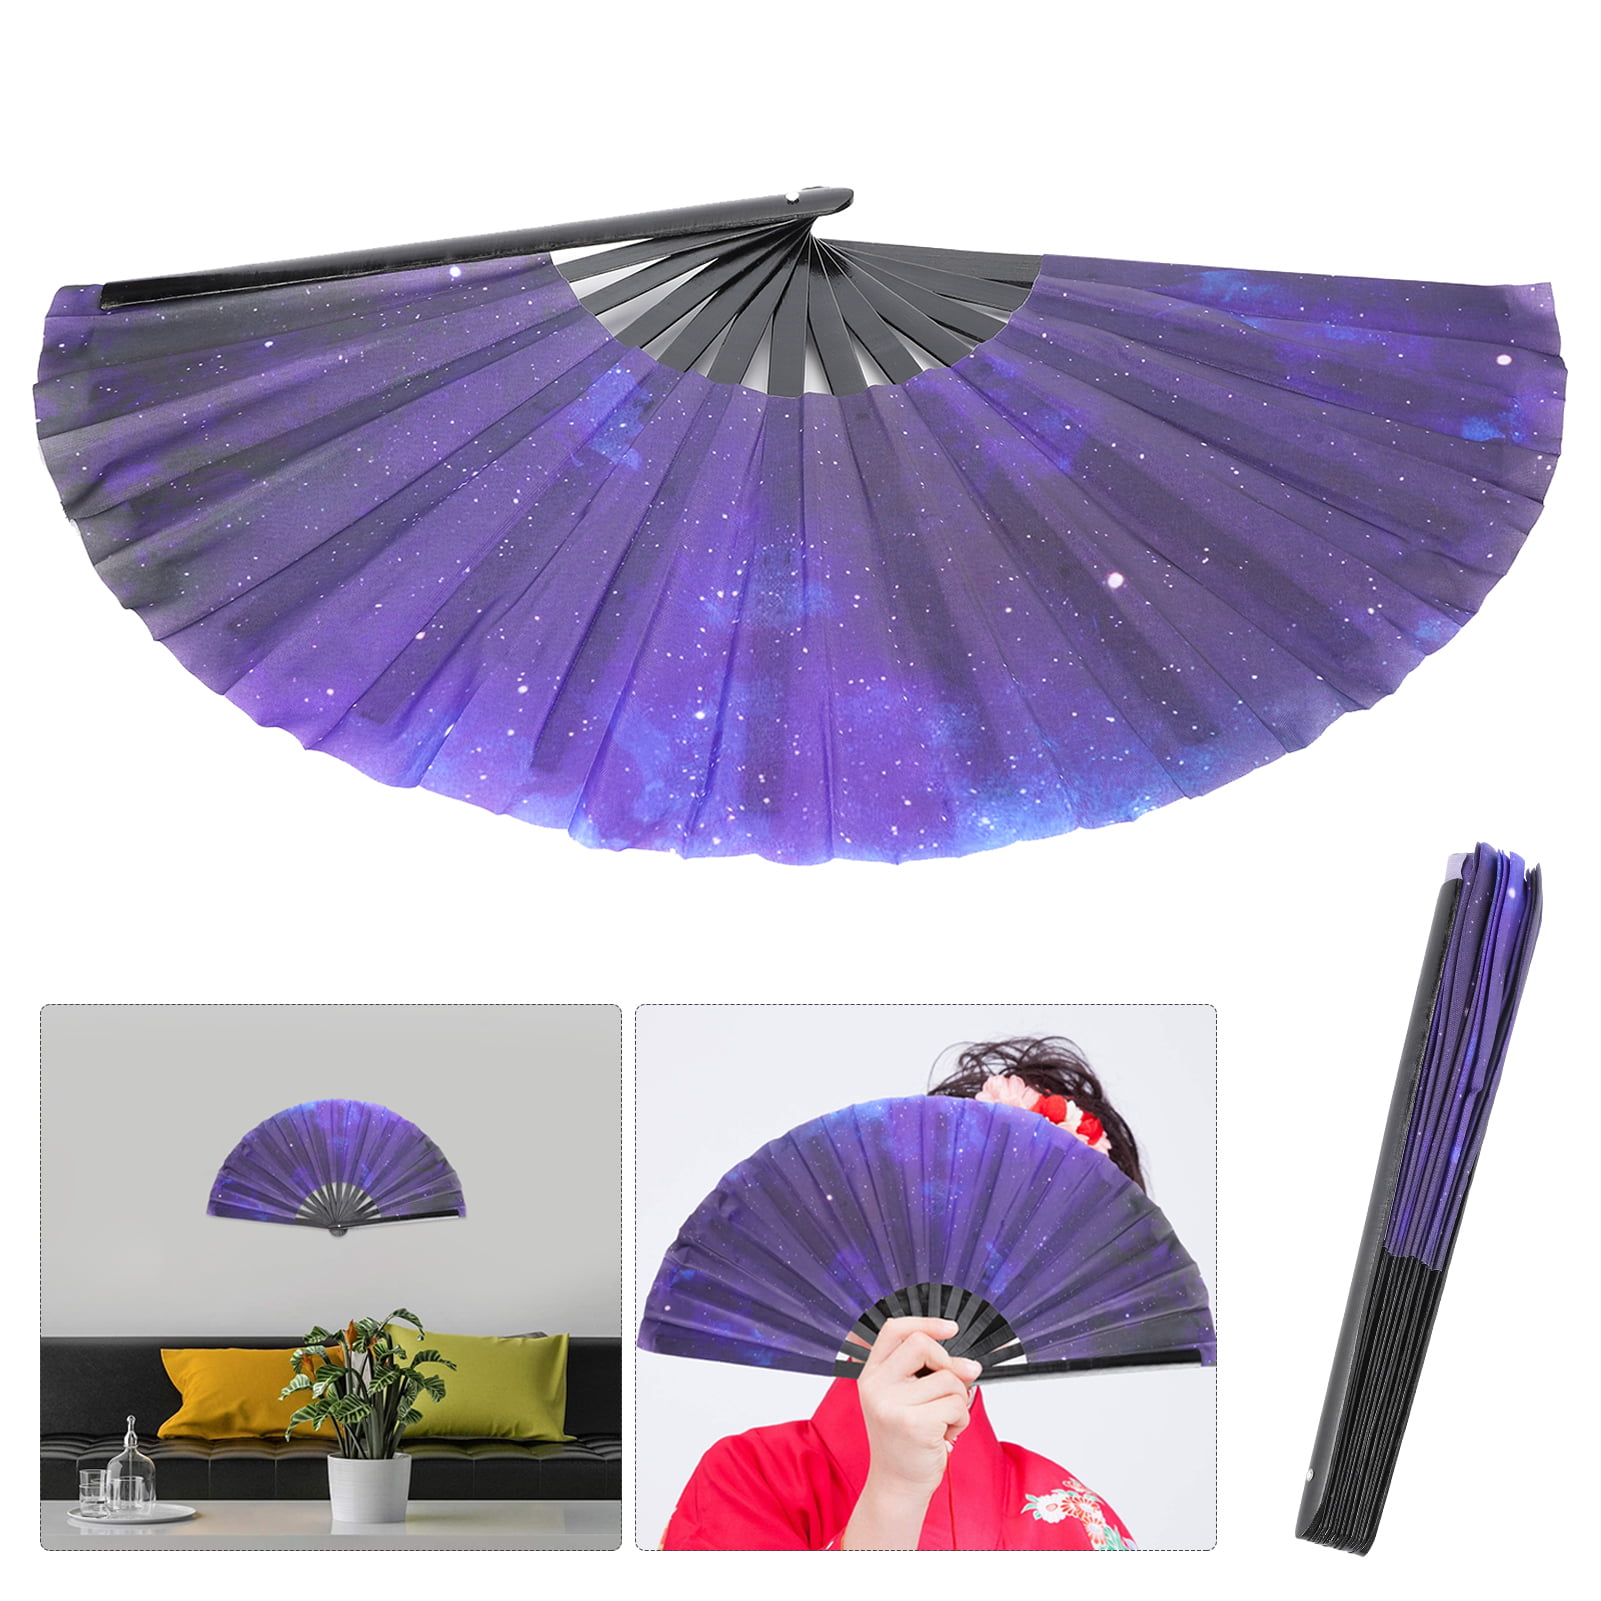 Details about   Purple Sky Kung Fu Fan Bamboo Folding Hand Fan for Decor Gift with Storage Bag 